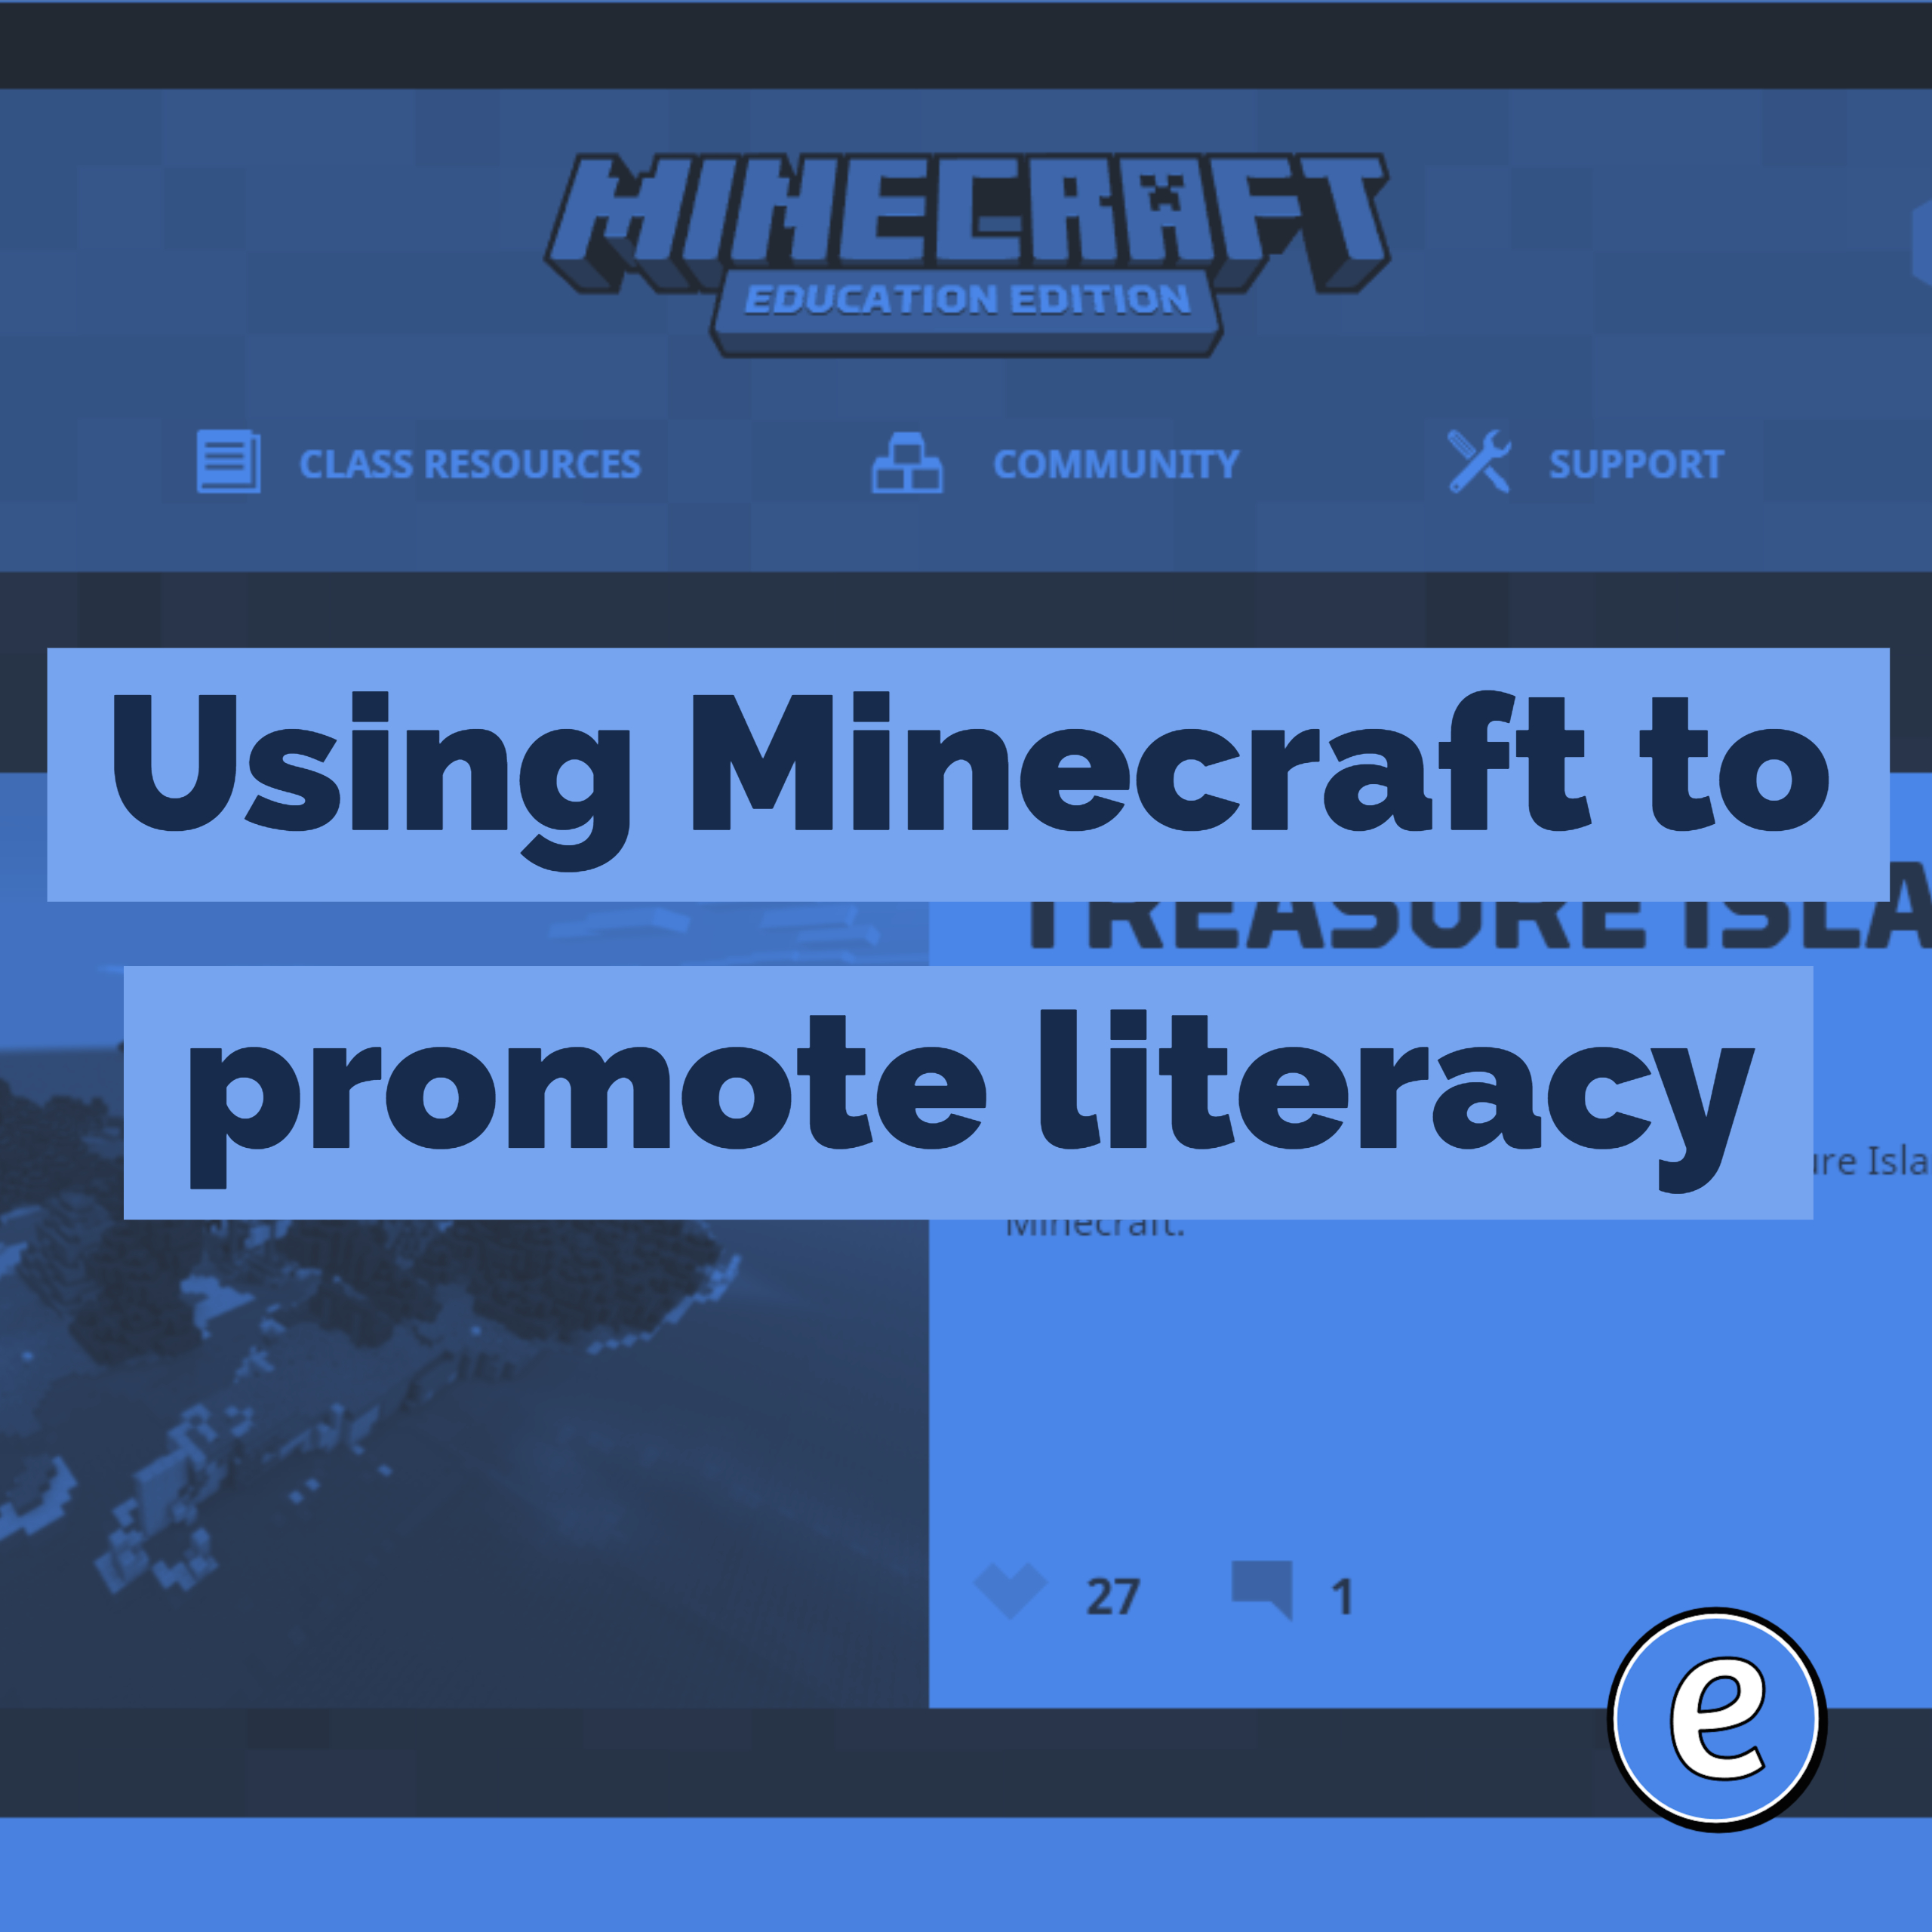 Using Minecraft to promote literacy